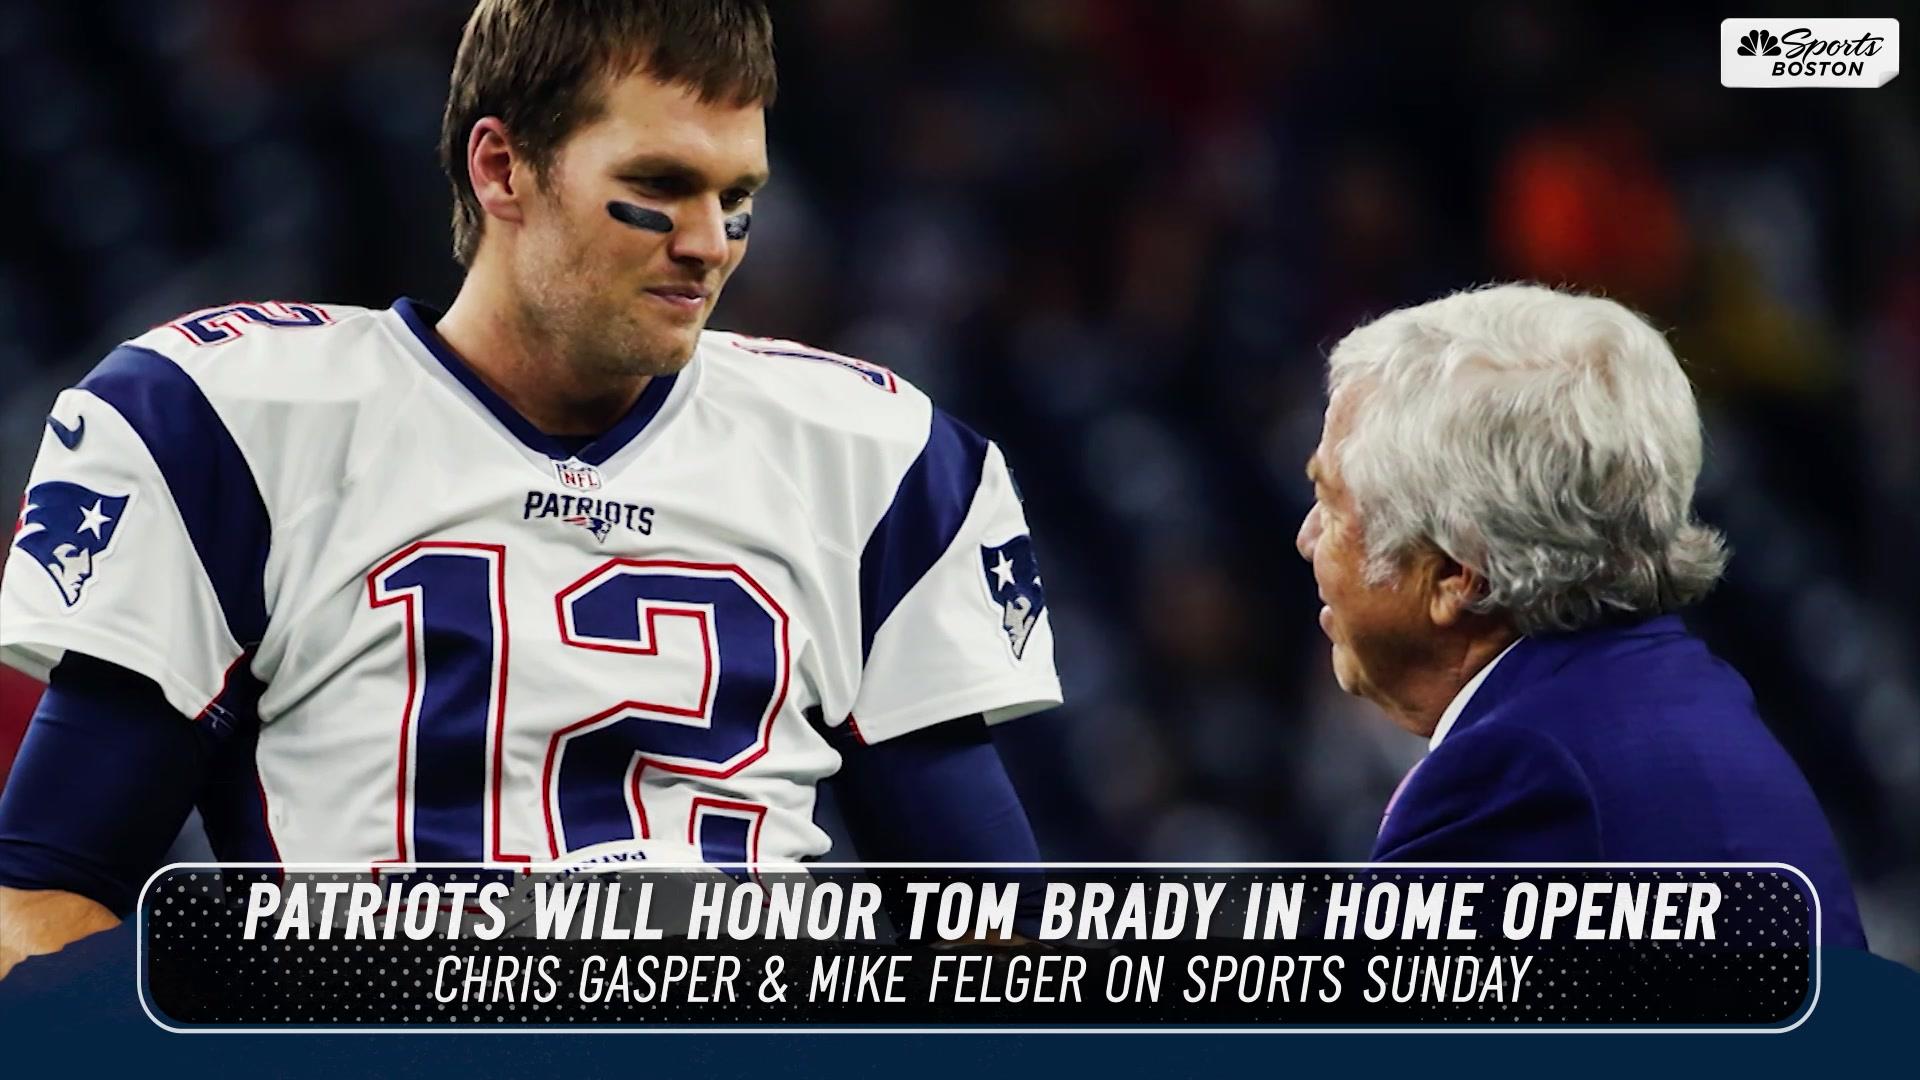 How does Bill Belichick feel about Patriots honoring Tom Brady